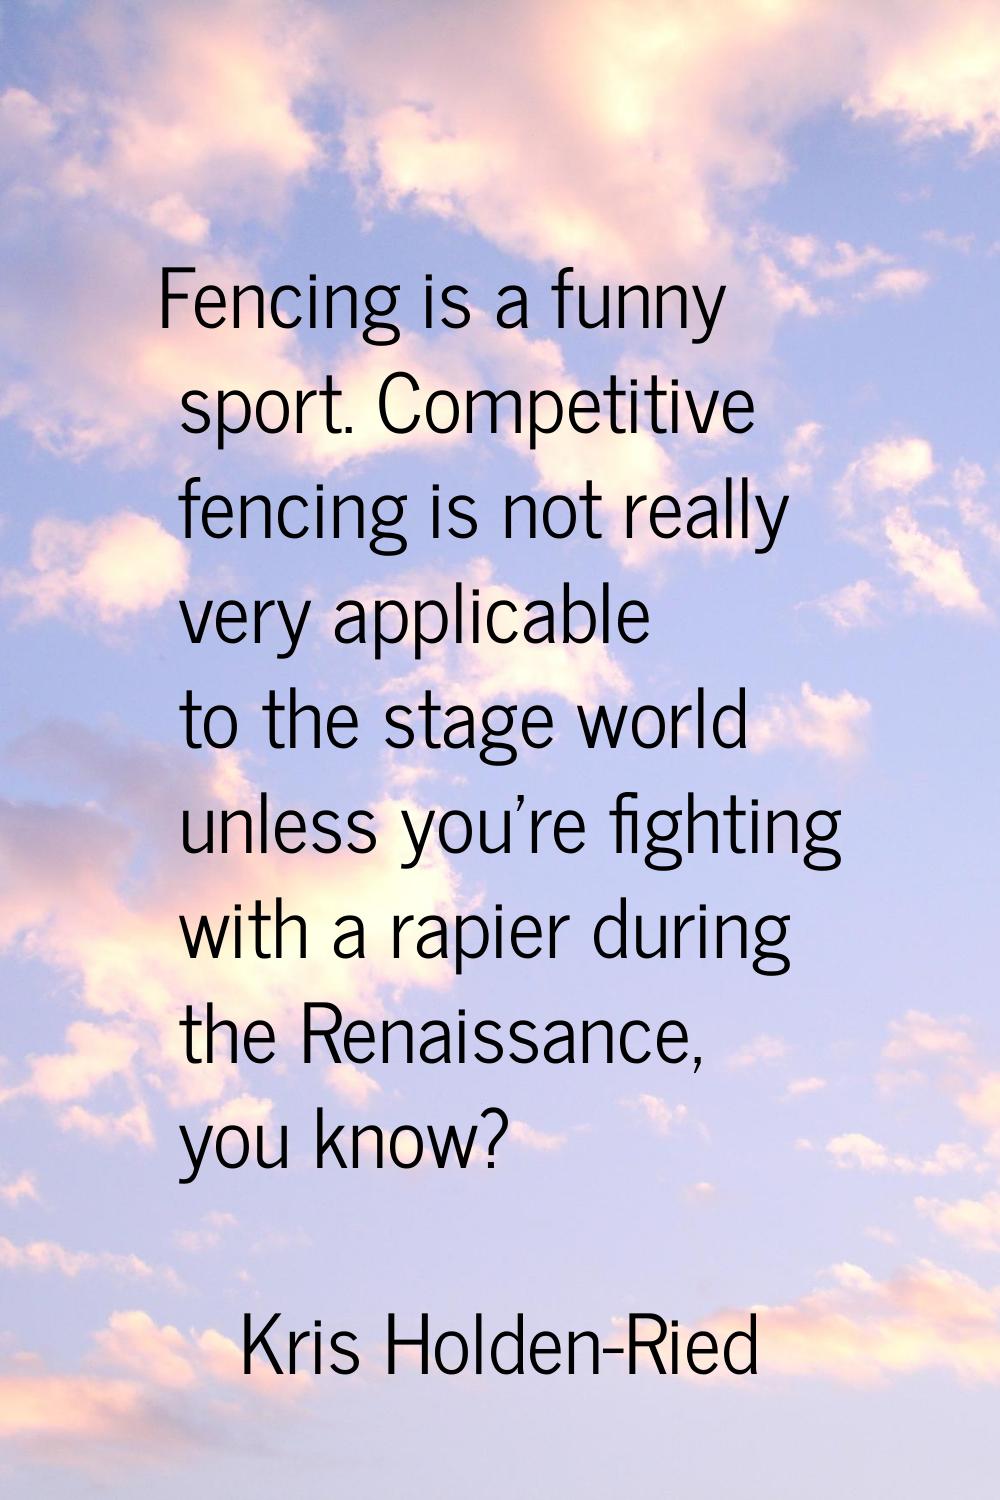 Fencing is a funny sport. Competitive fencing is not really very applicable to the stage world unle